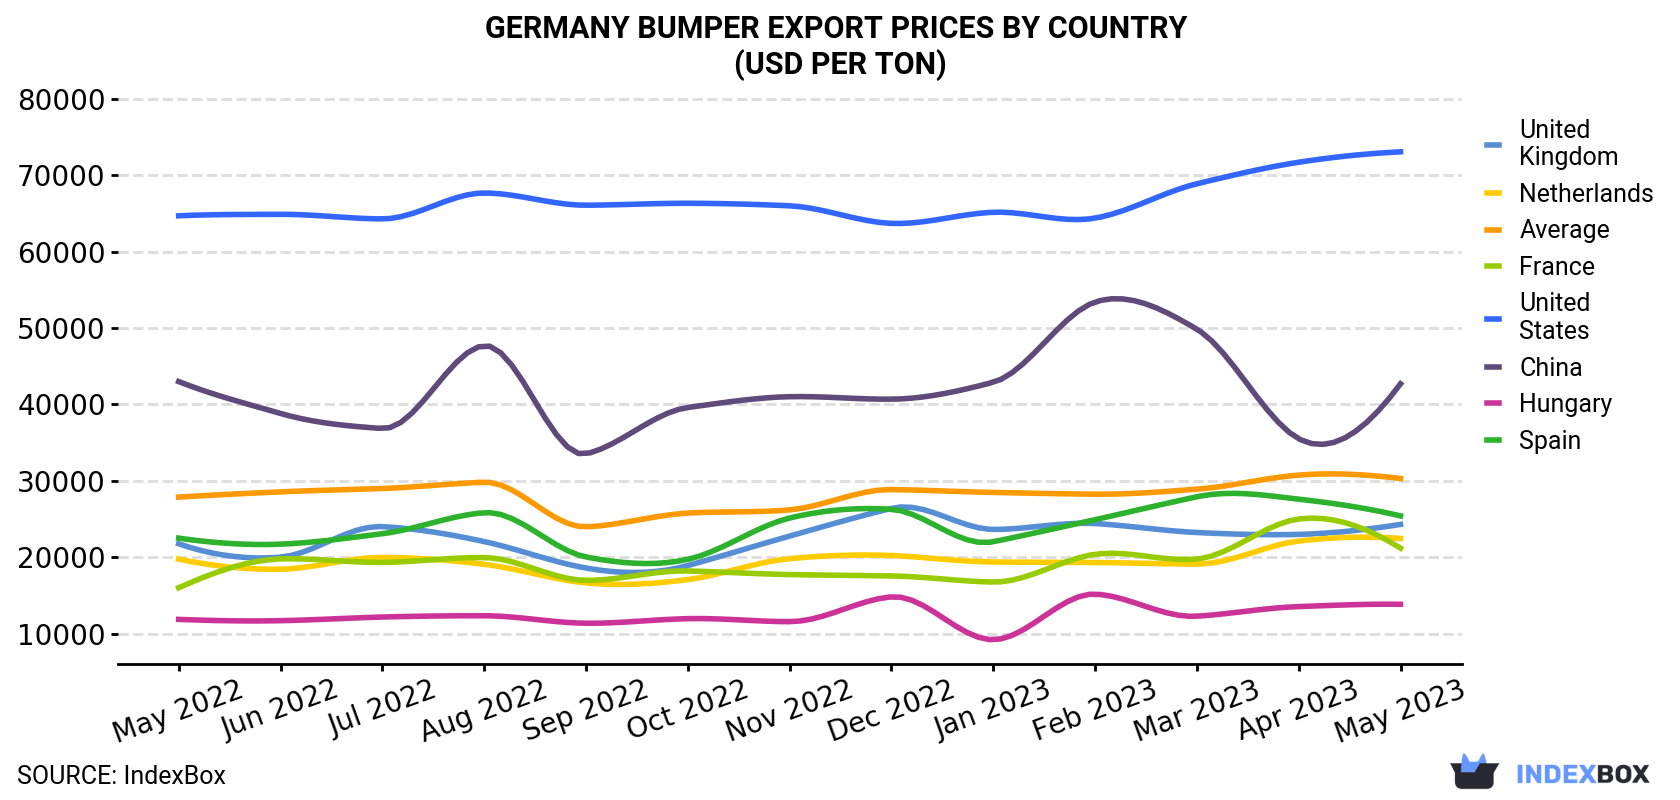 Germany Bumper Export Prices By Country (USD Per Ton)